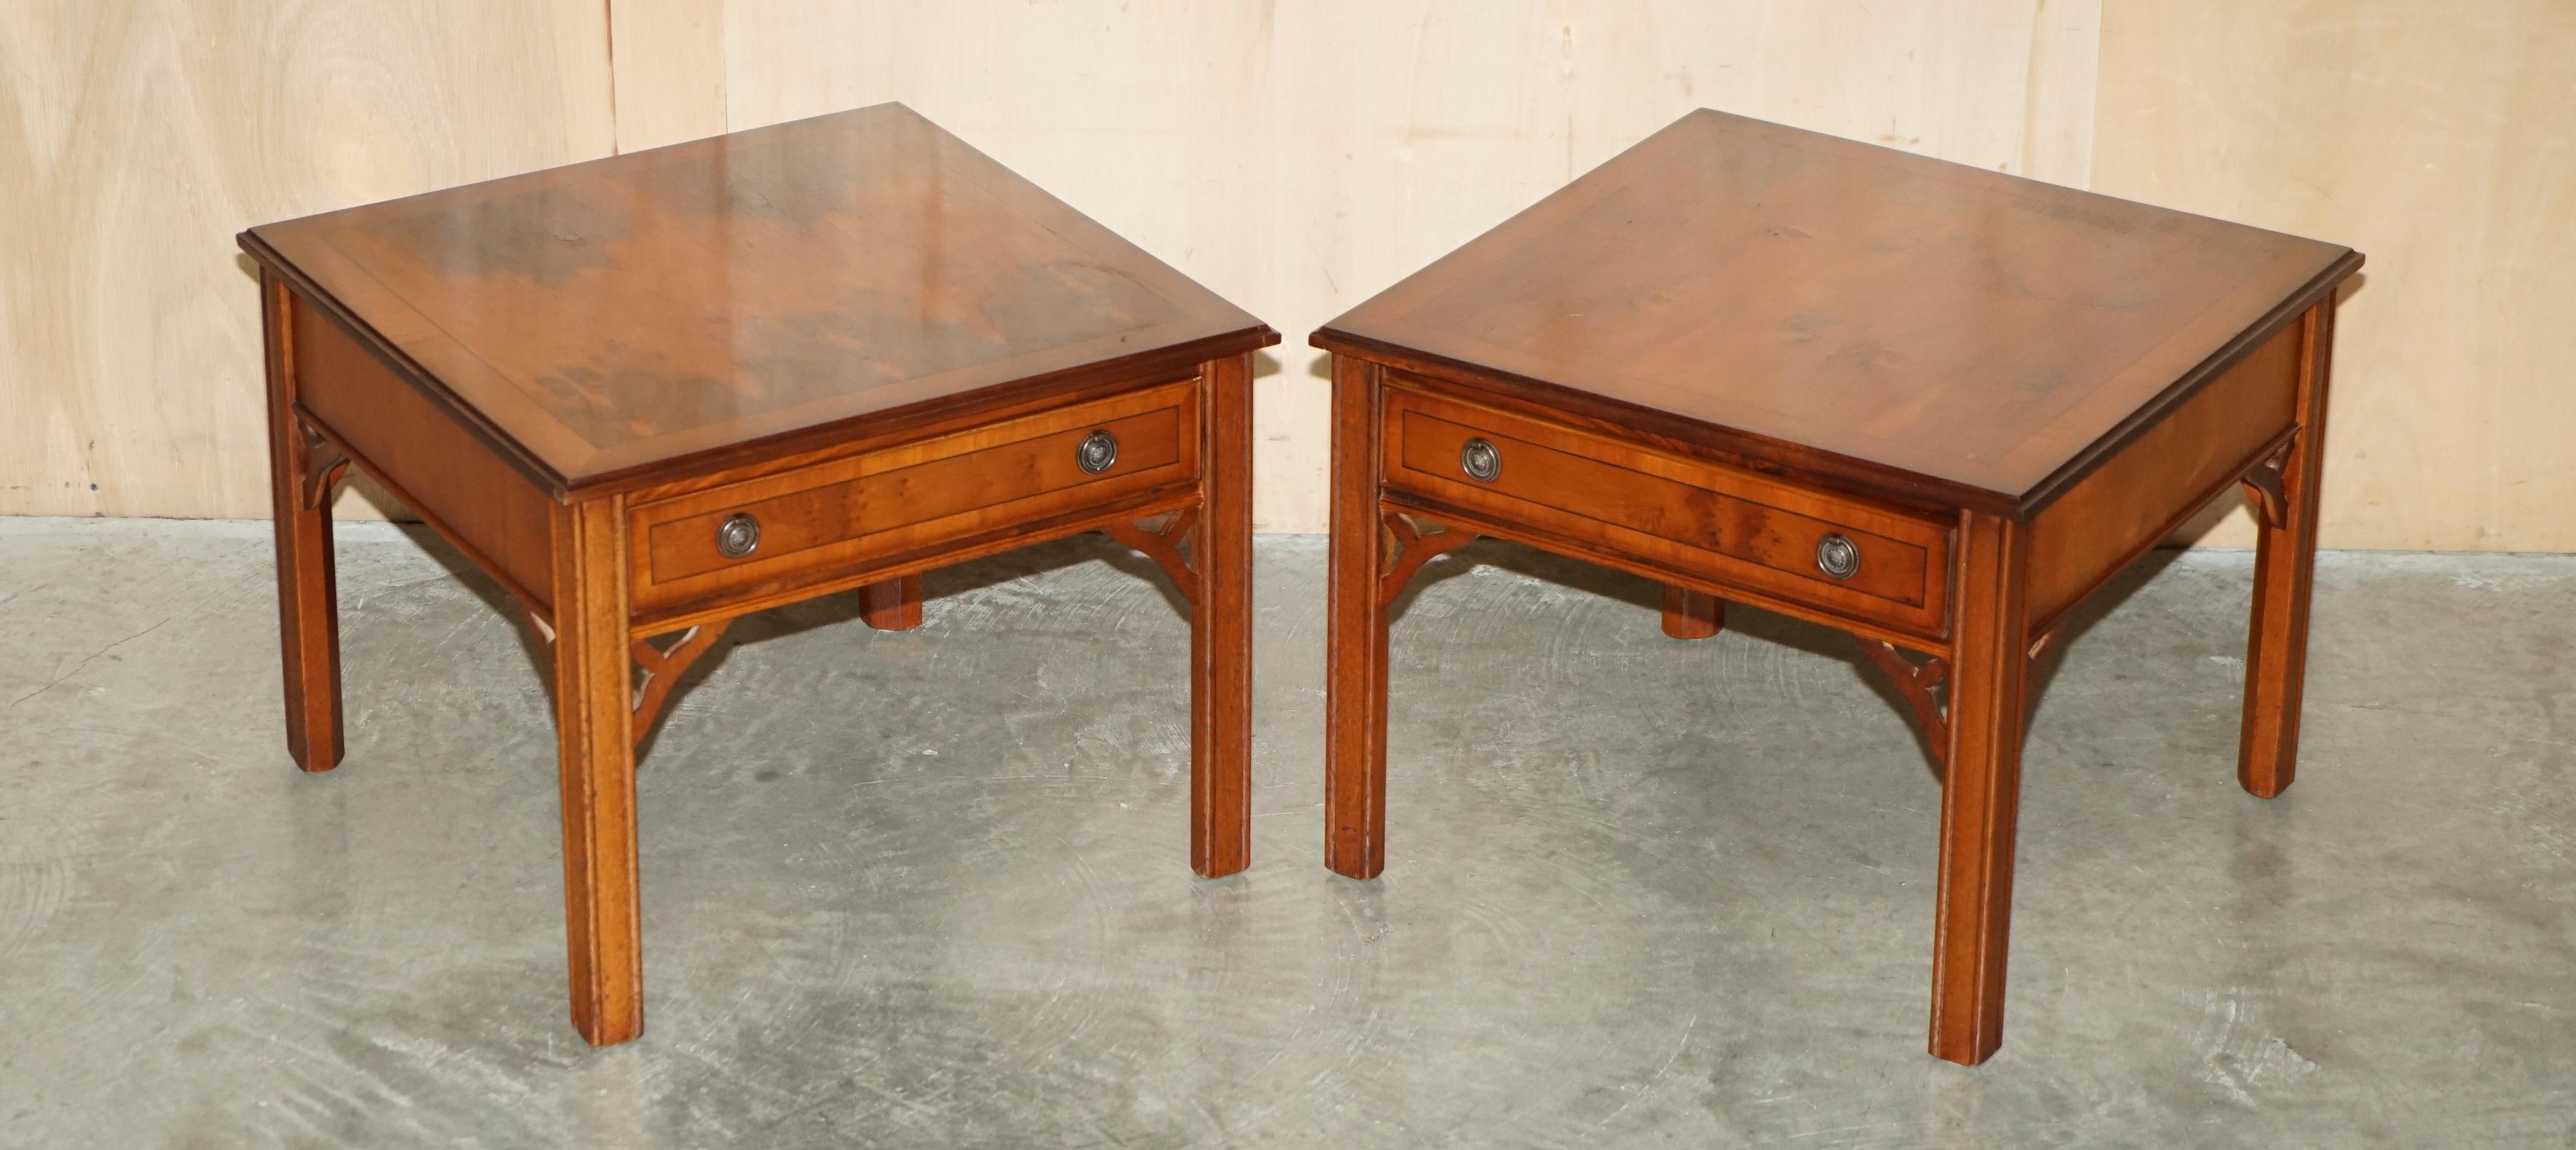 Royal House Antiques

Royal House Antiques is delighted to offer for sale this lovely pair of vintage Burr Yew Wood side end lamp wine tables with large single drawers

Please note the delivery fee listed is just a guide, it covers within the M25